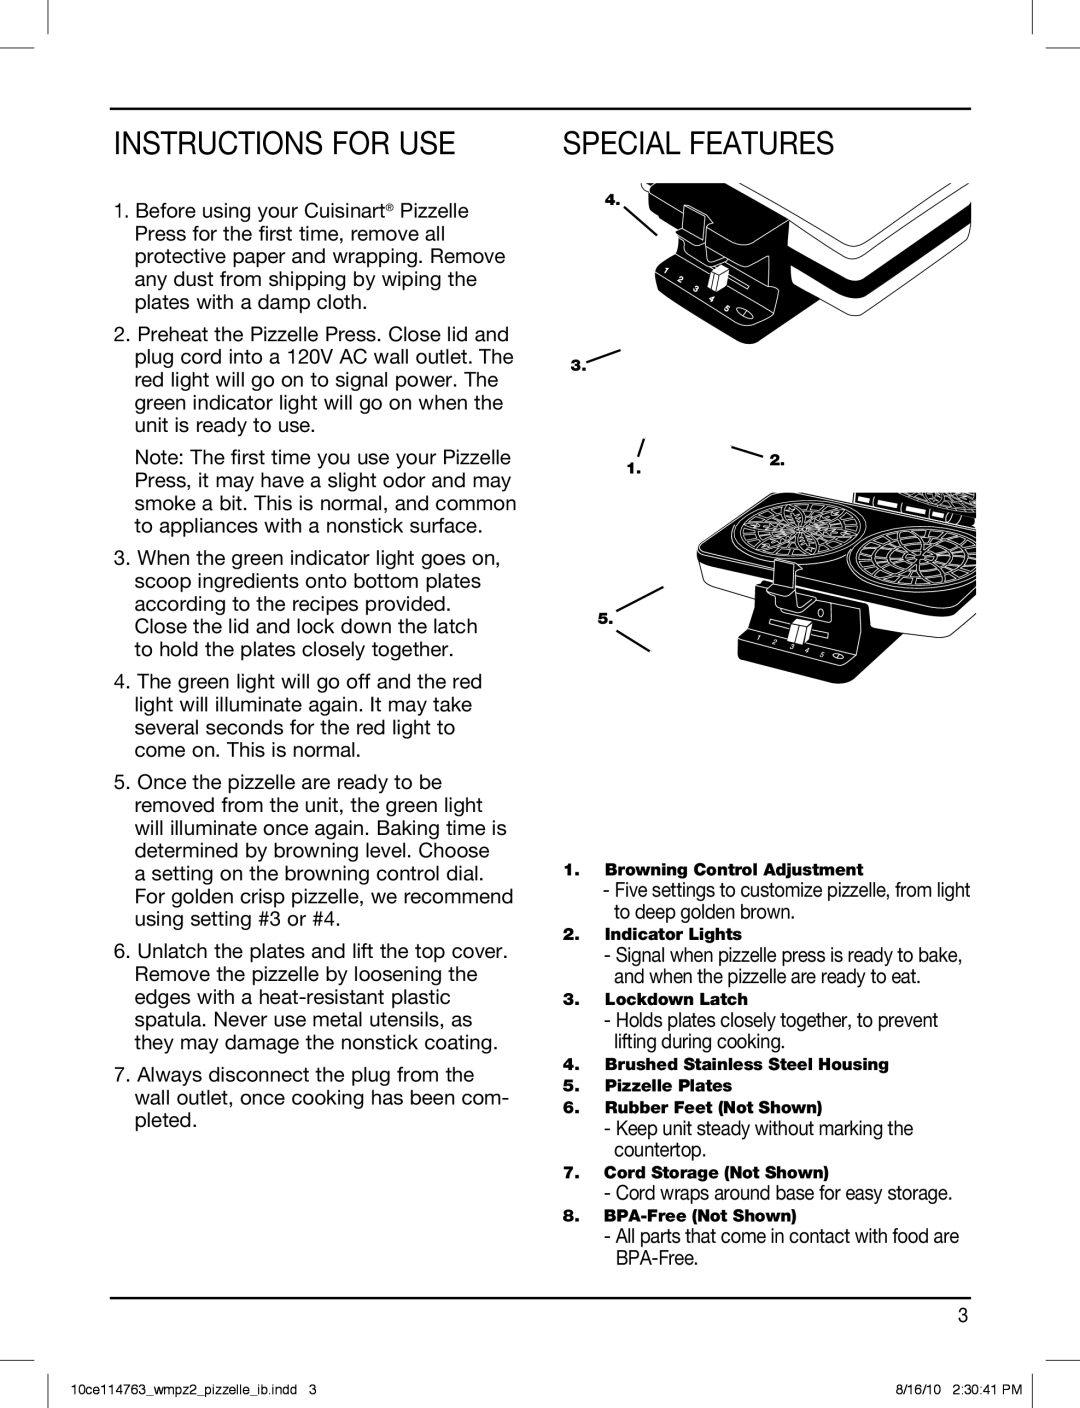 Cuisinart WM-PZ2 manual Instructions For Use, Special Features 